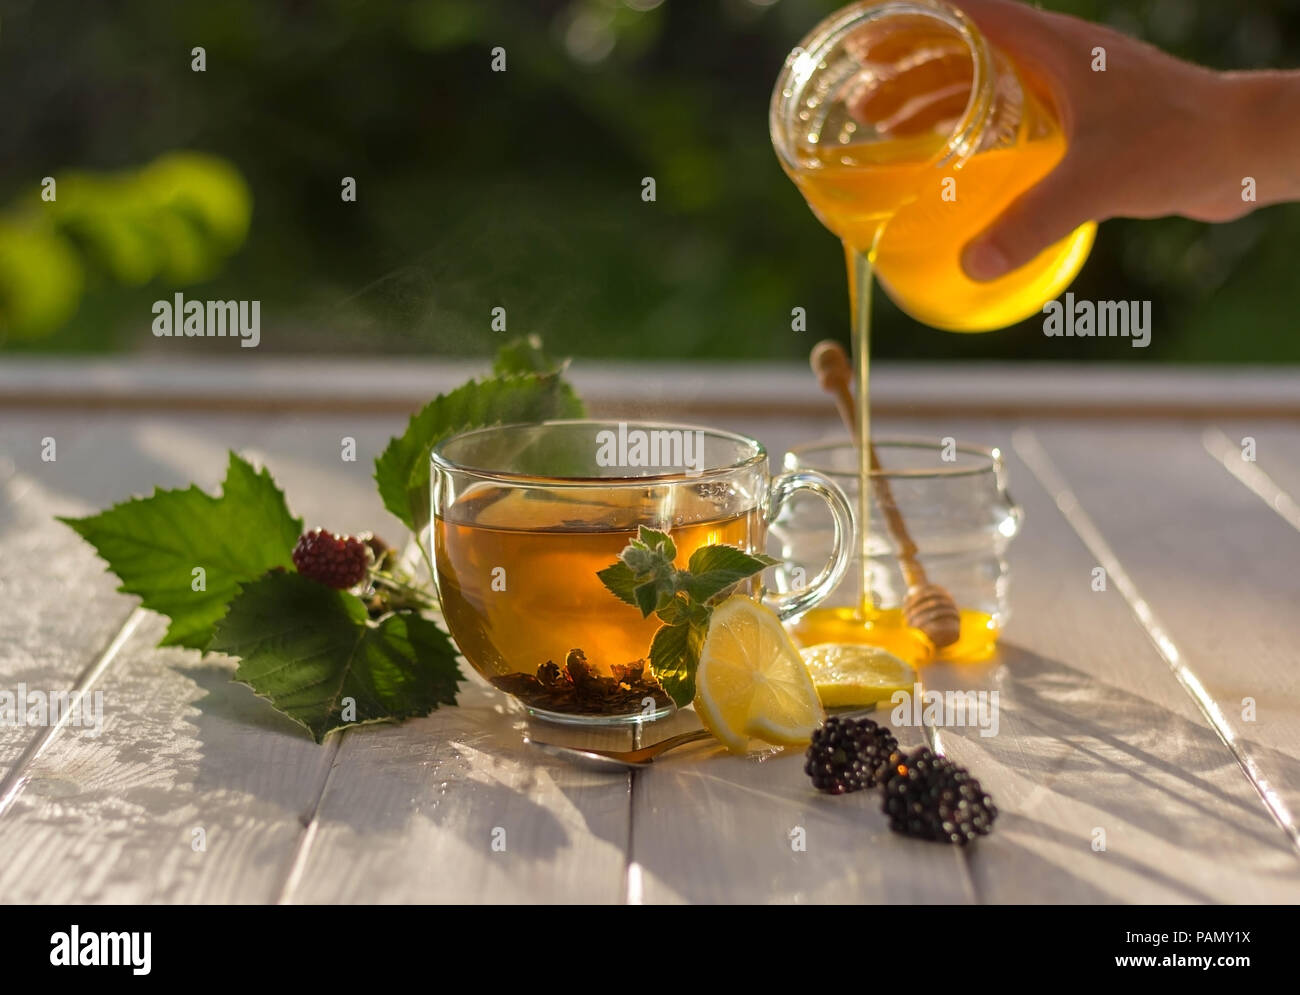 Healthy breakfast concept. Tea with lemon, berries and honey in a jar. A woman is pouring honey. Slow life. Stock Photo